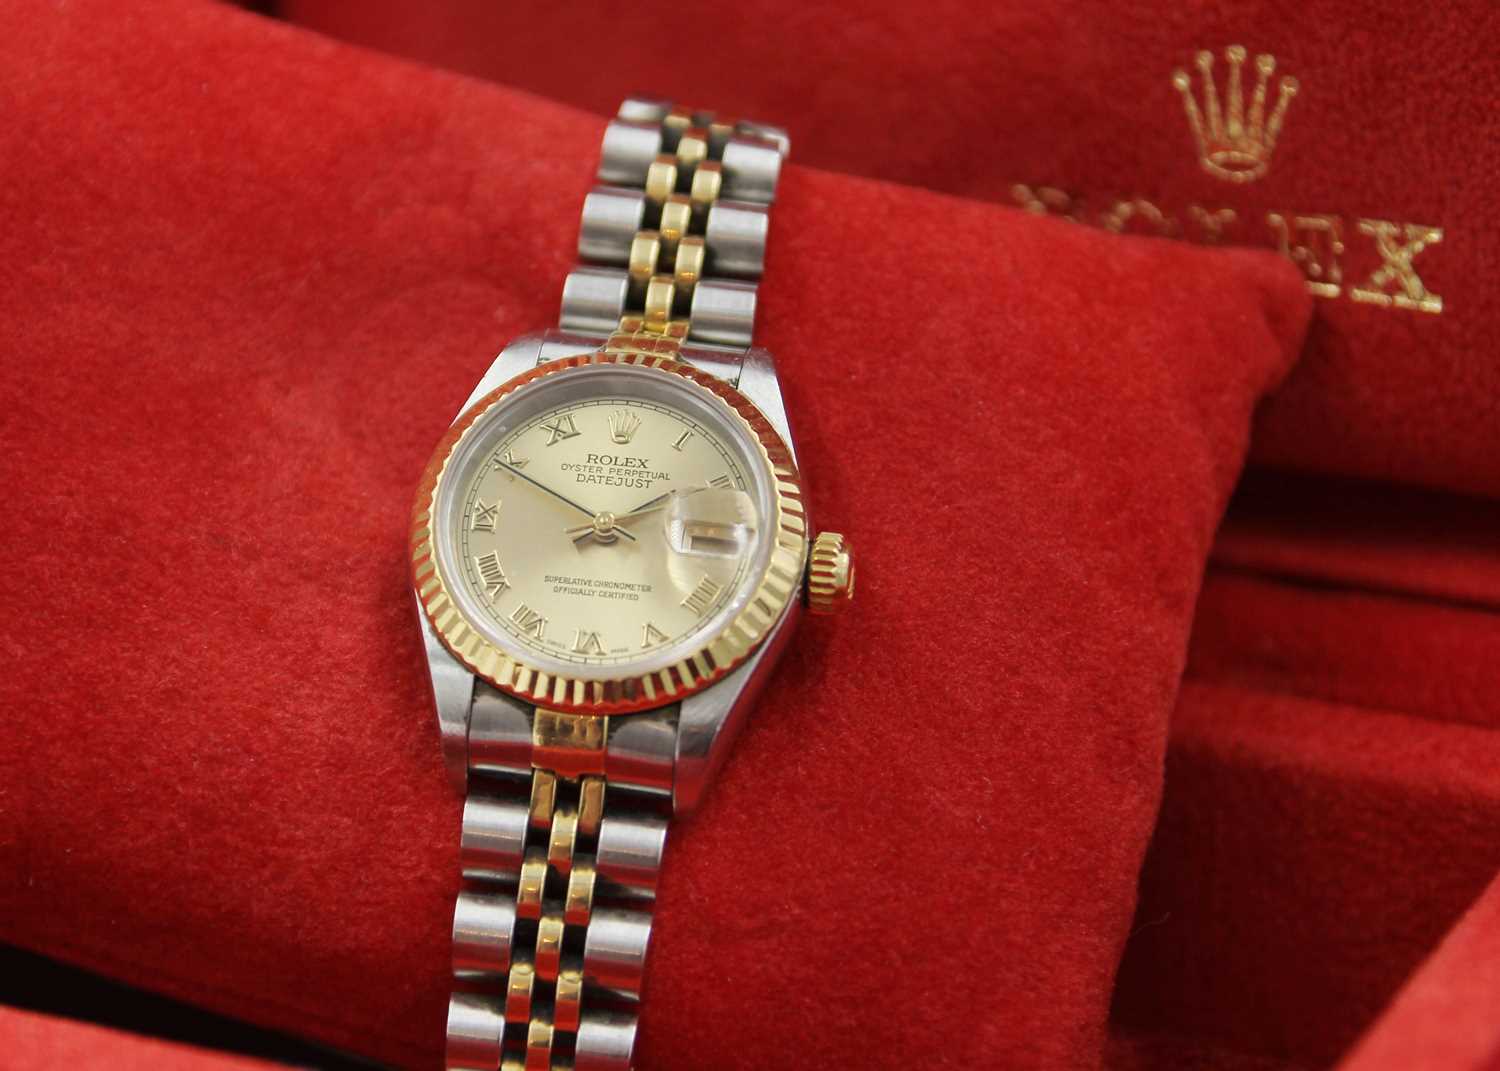 ROLEX - A Rolex Oyster Perpetual Datejust lady's gold and stainless steel bracelet wristwatch. - Image 5 of 8